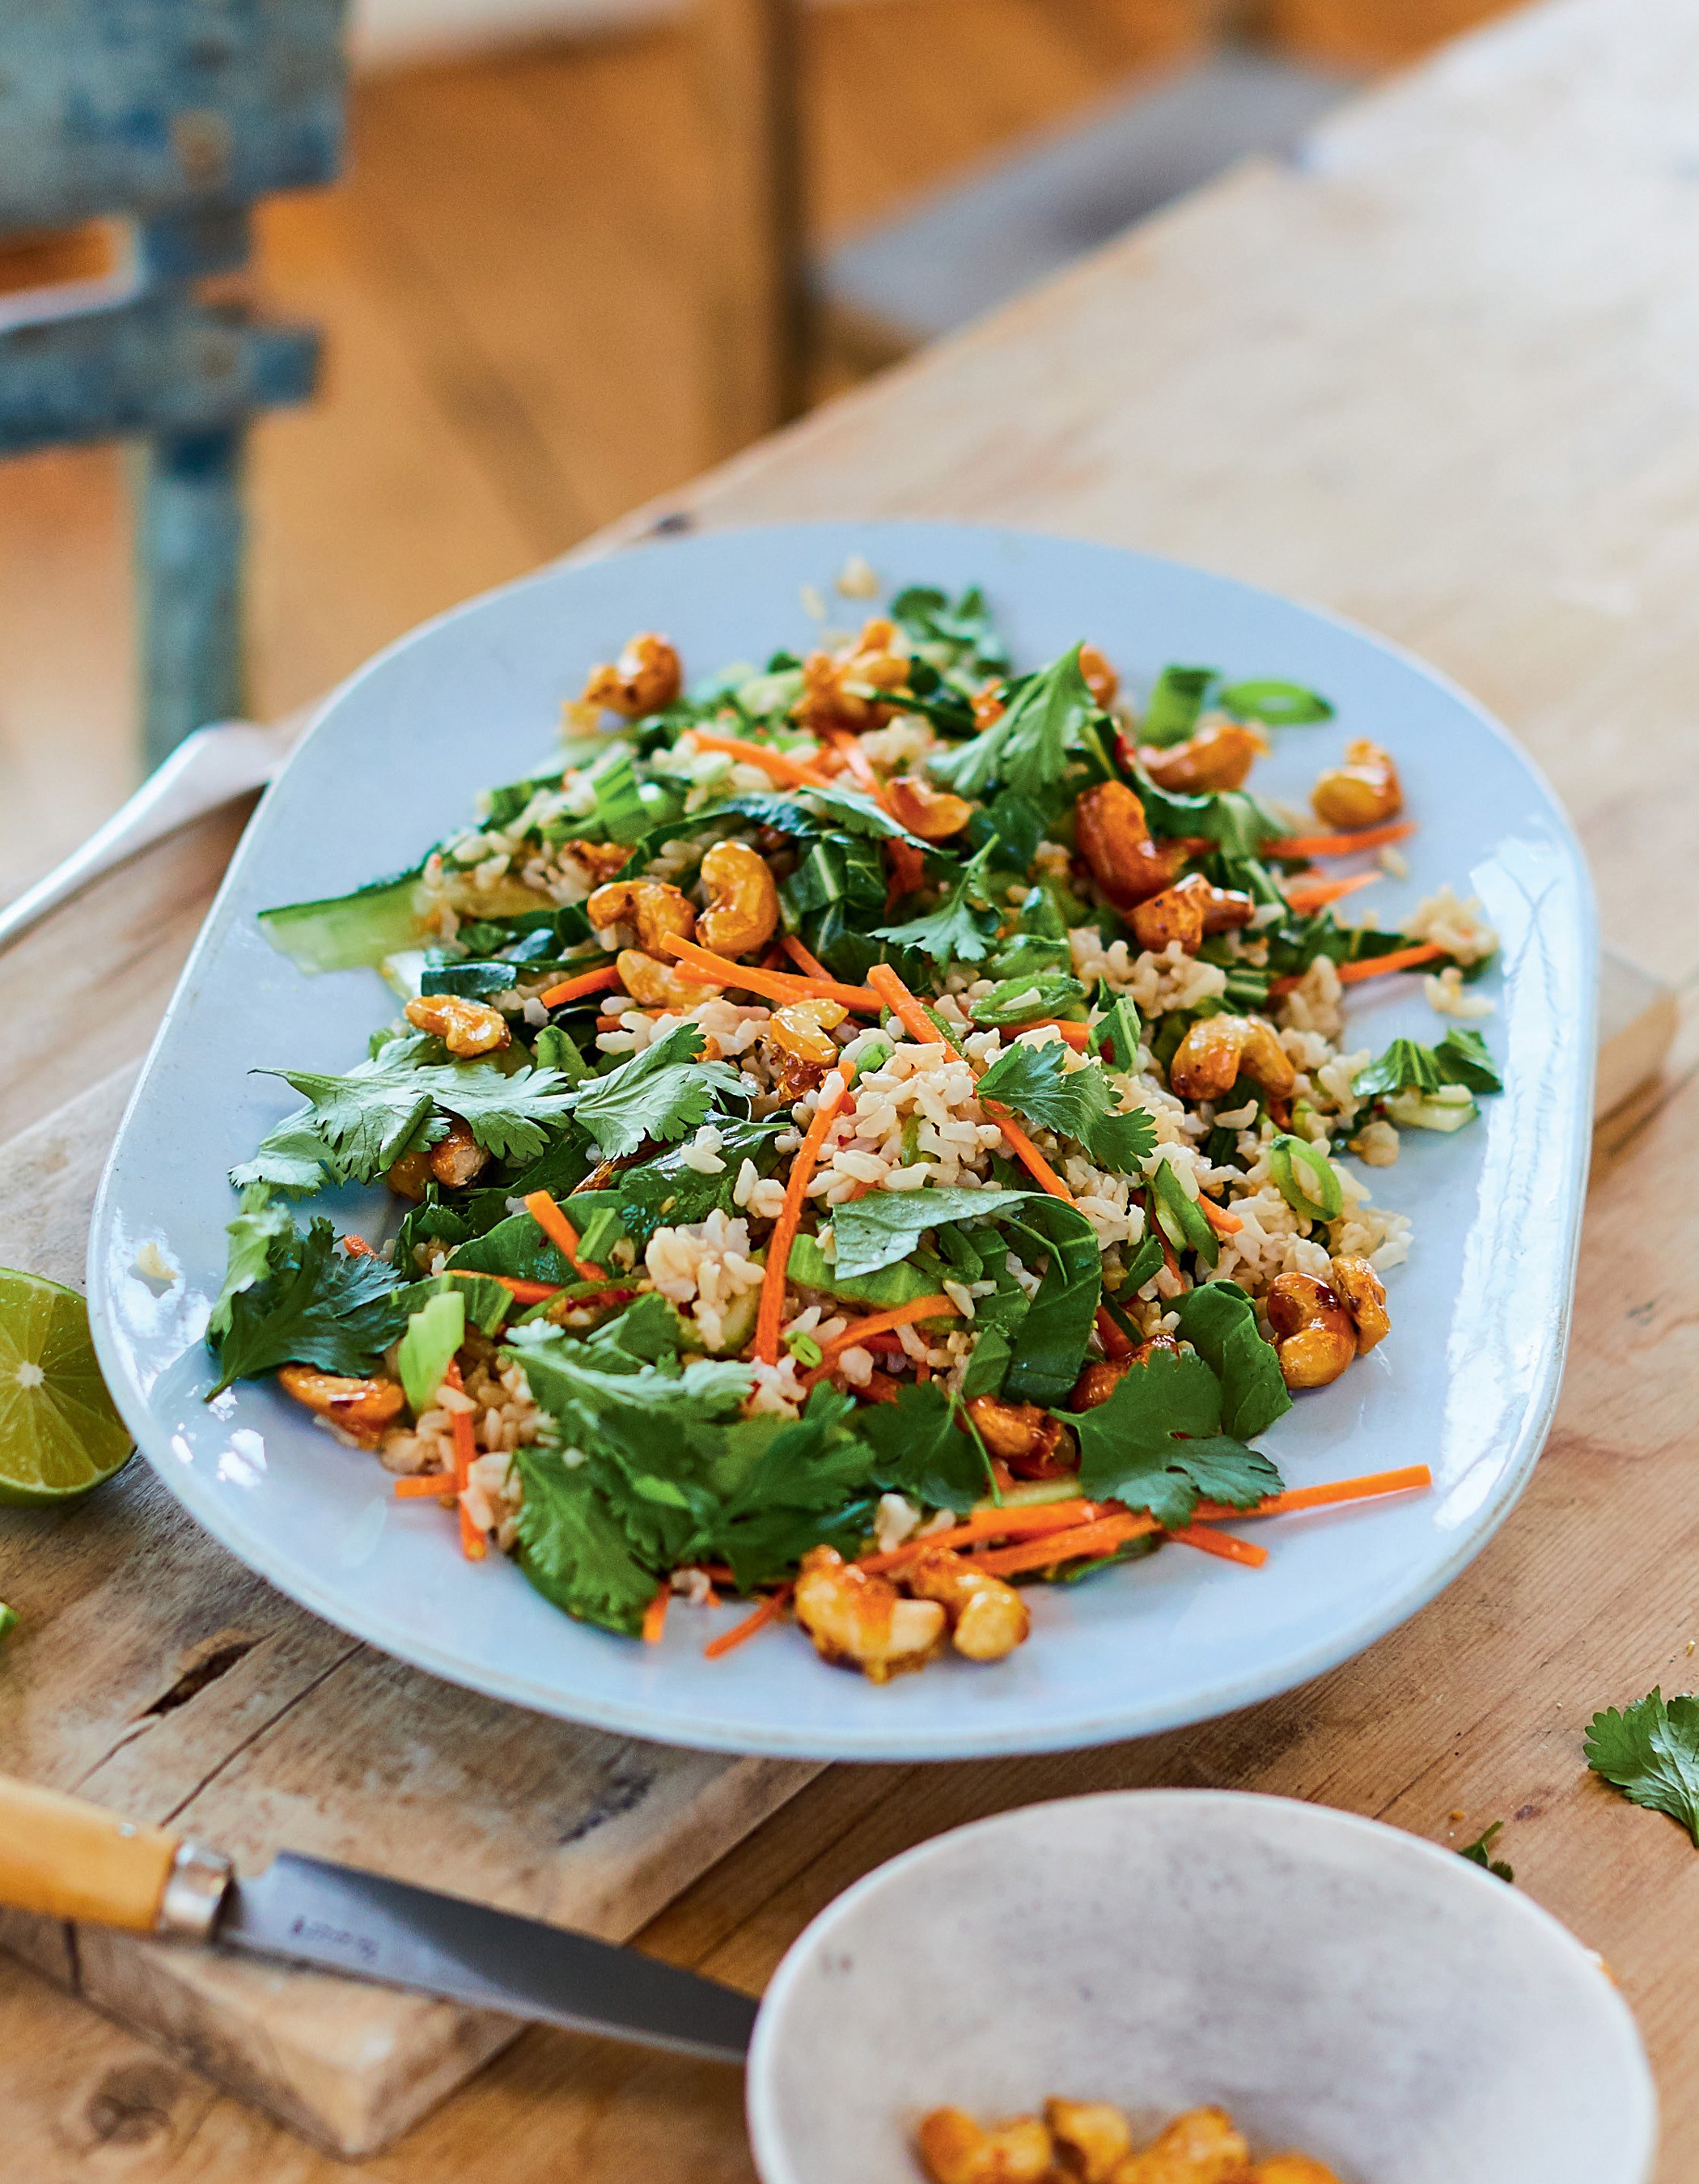 Slightly Asian Rice Salad from The Vegetarian Kitchen by Peta Leith and ...